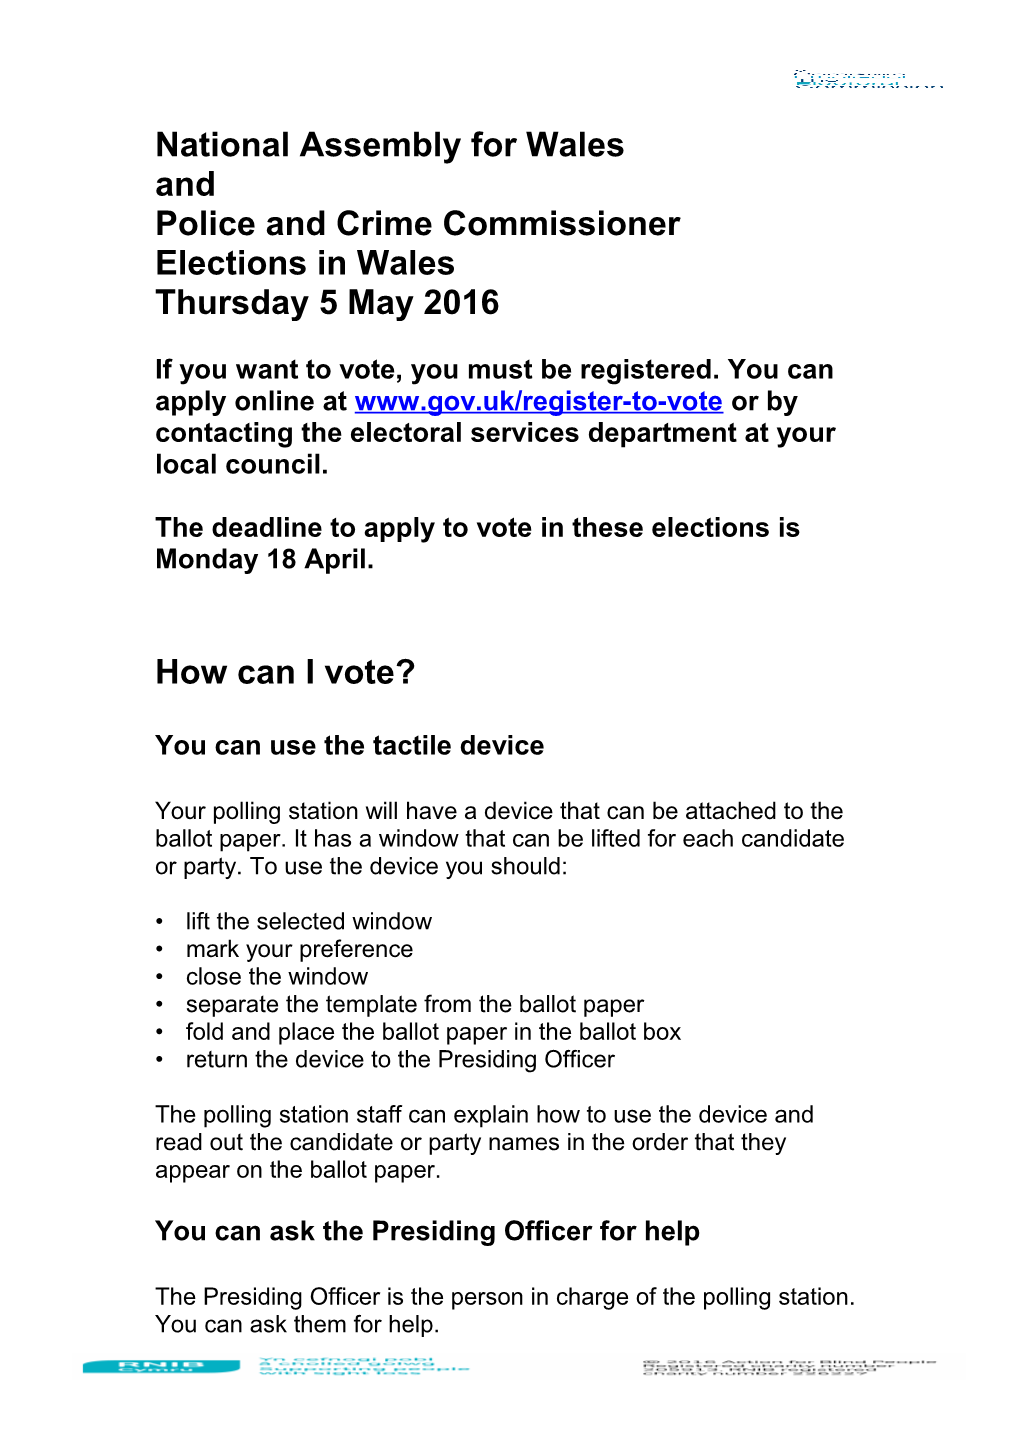 The Deadline to Apply to Vote in These Elections Is Monday 18 April